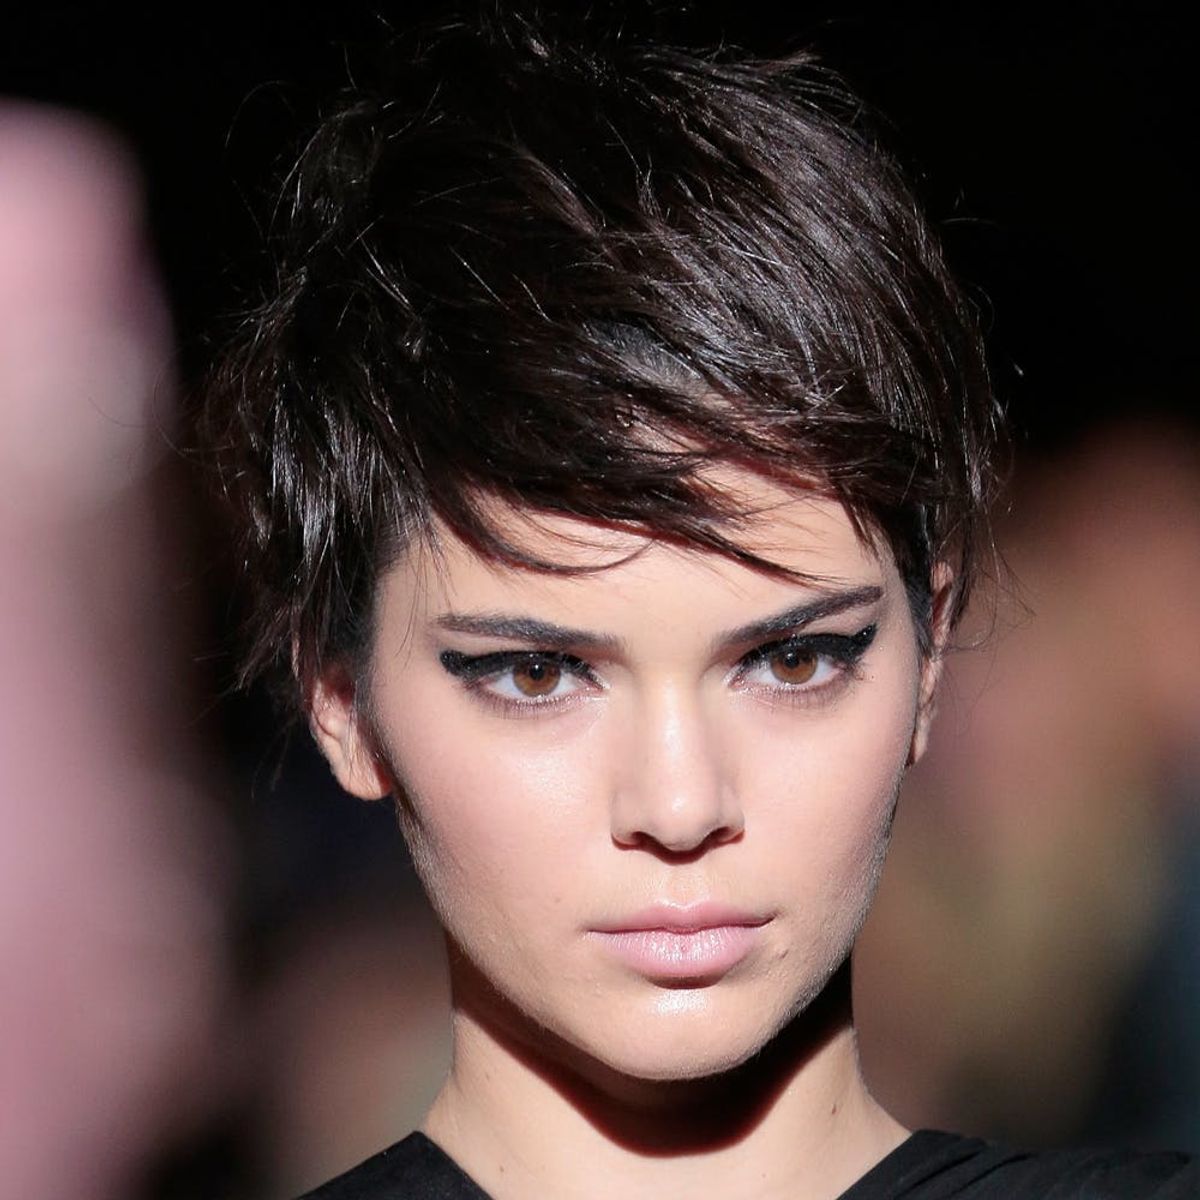 Kendall Jenner and Gigi Hadid Just Rocked Matching Pixie Haircuts